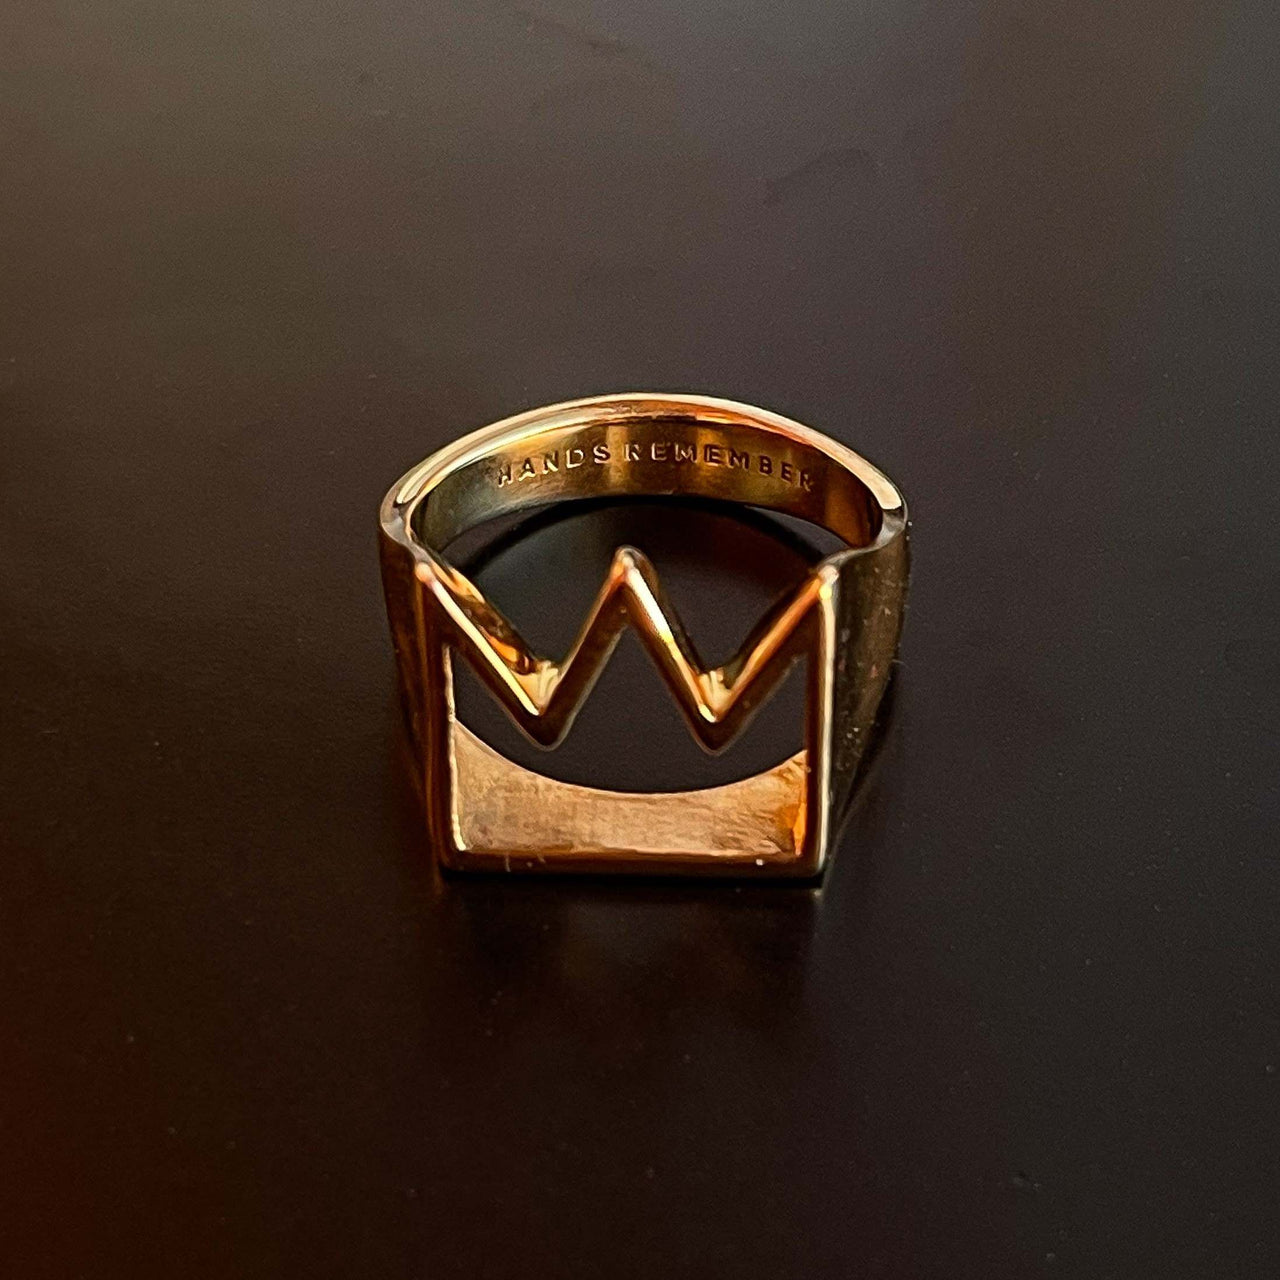 RING "CROWN" / SOLID GOLD